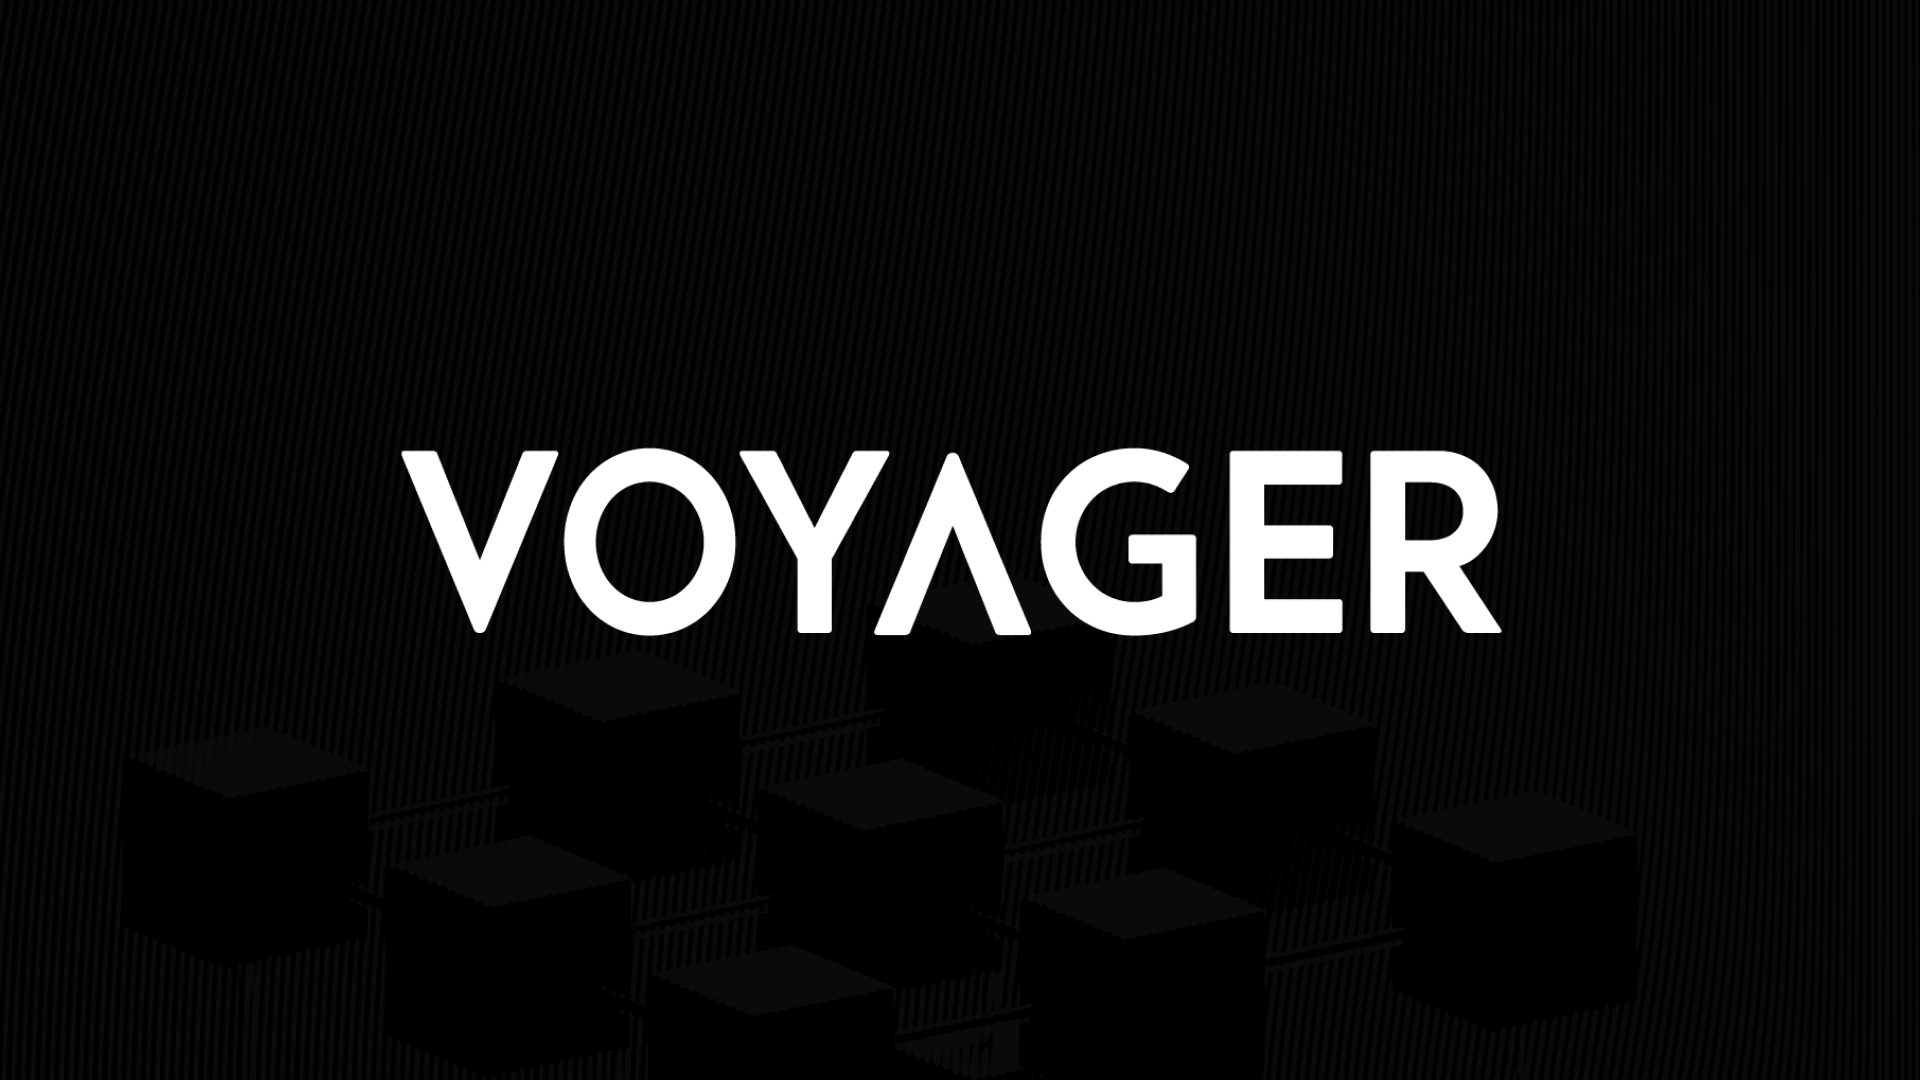 Voyager Suffers Potential Data Breach While In Recovery Process